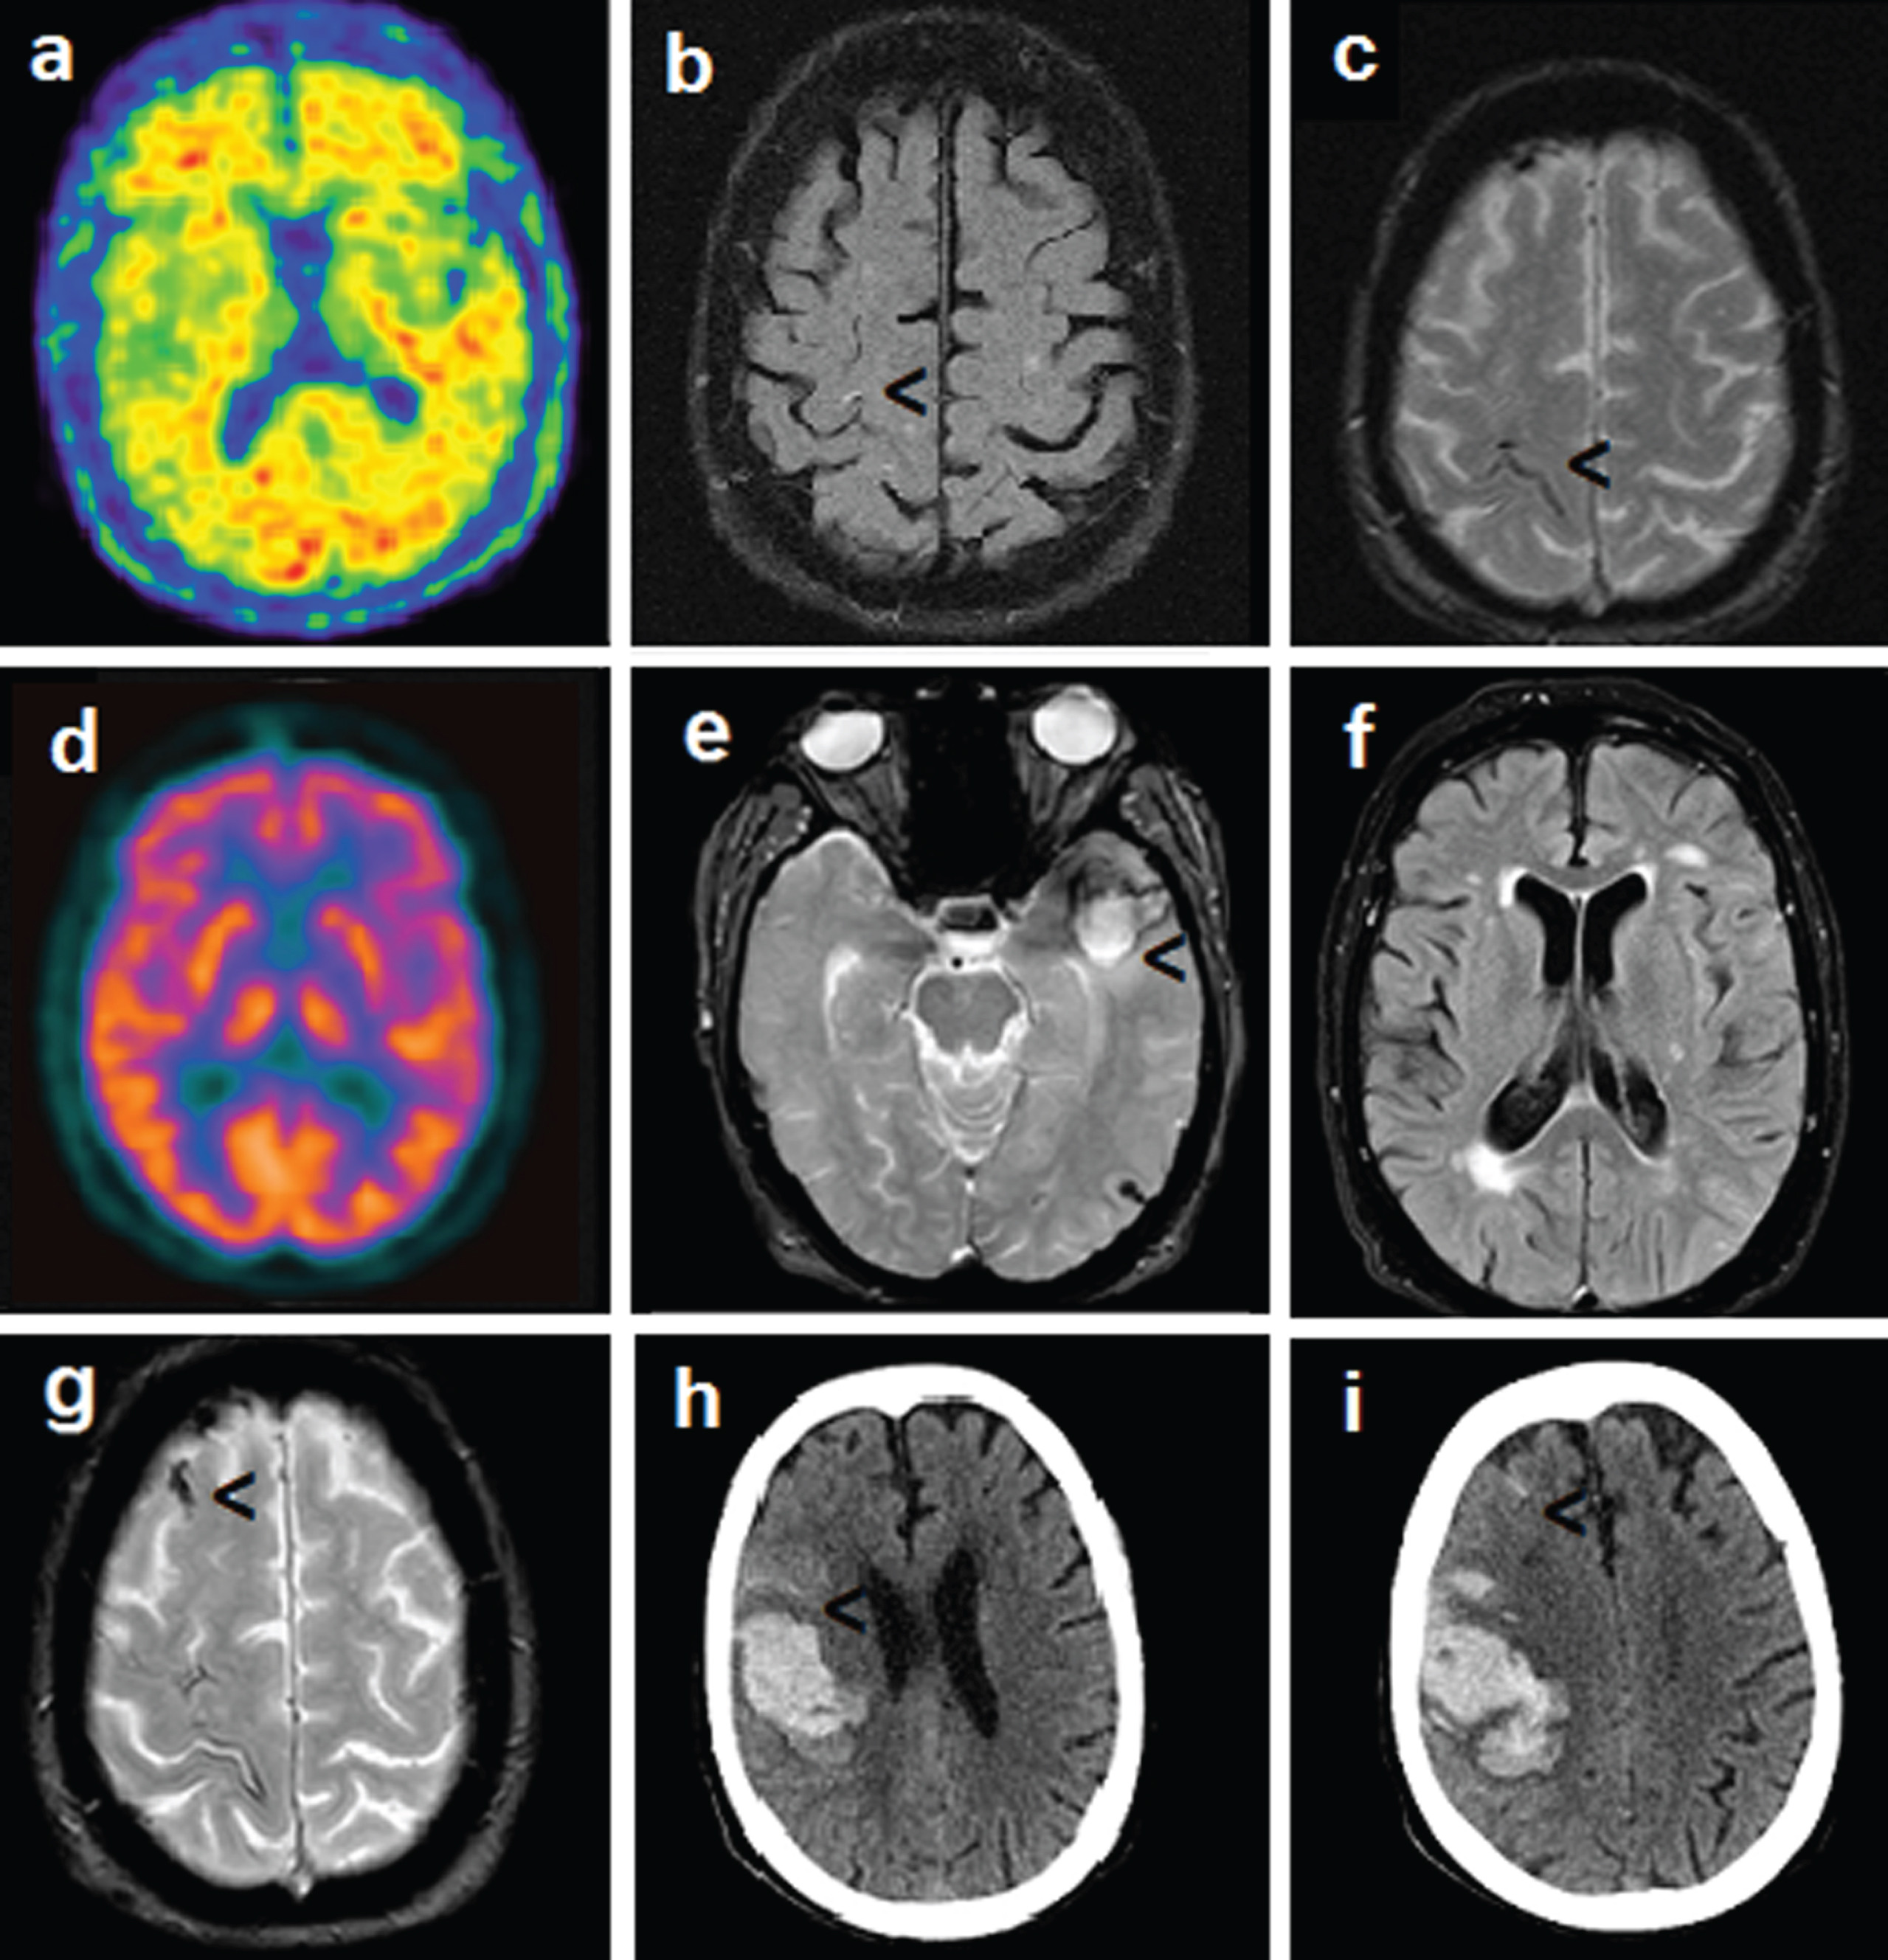 a) Florbetapir PET (age 79): amyloid presence in the brain. b) Brain MRI on T2 FLAIR WI (age 80): small hyperintensity in the right precentral lesion. c) Brain MRI on T2* WI (age 80): hemosiderin deposition along with the right Rolandic fissure. d) FDG-PET imaging (age 77): absence of AD-like pattern. e) Brain MRI on T2* WI (age 82): lobar hemorrhage in the left temporopolar region, cortical superficial siderosis in the left temporal sulcus. f) Brain MRI on T2 FLAIR WI (age 82): white matter hyperintensity. g) Brain MRI on T2*WI (age 82): cortical superficial siderosis in the right superior frontal sulcus. h, i) Brain CT (age 82): large hemorrhage on the right fronto-parietal region, small amount of subarachnoid hemorrhage. (Permission to share imaging was granted by the patient before death).